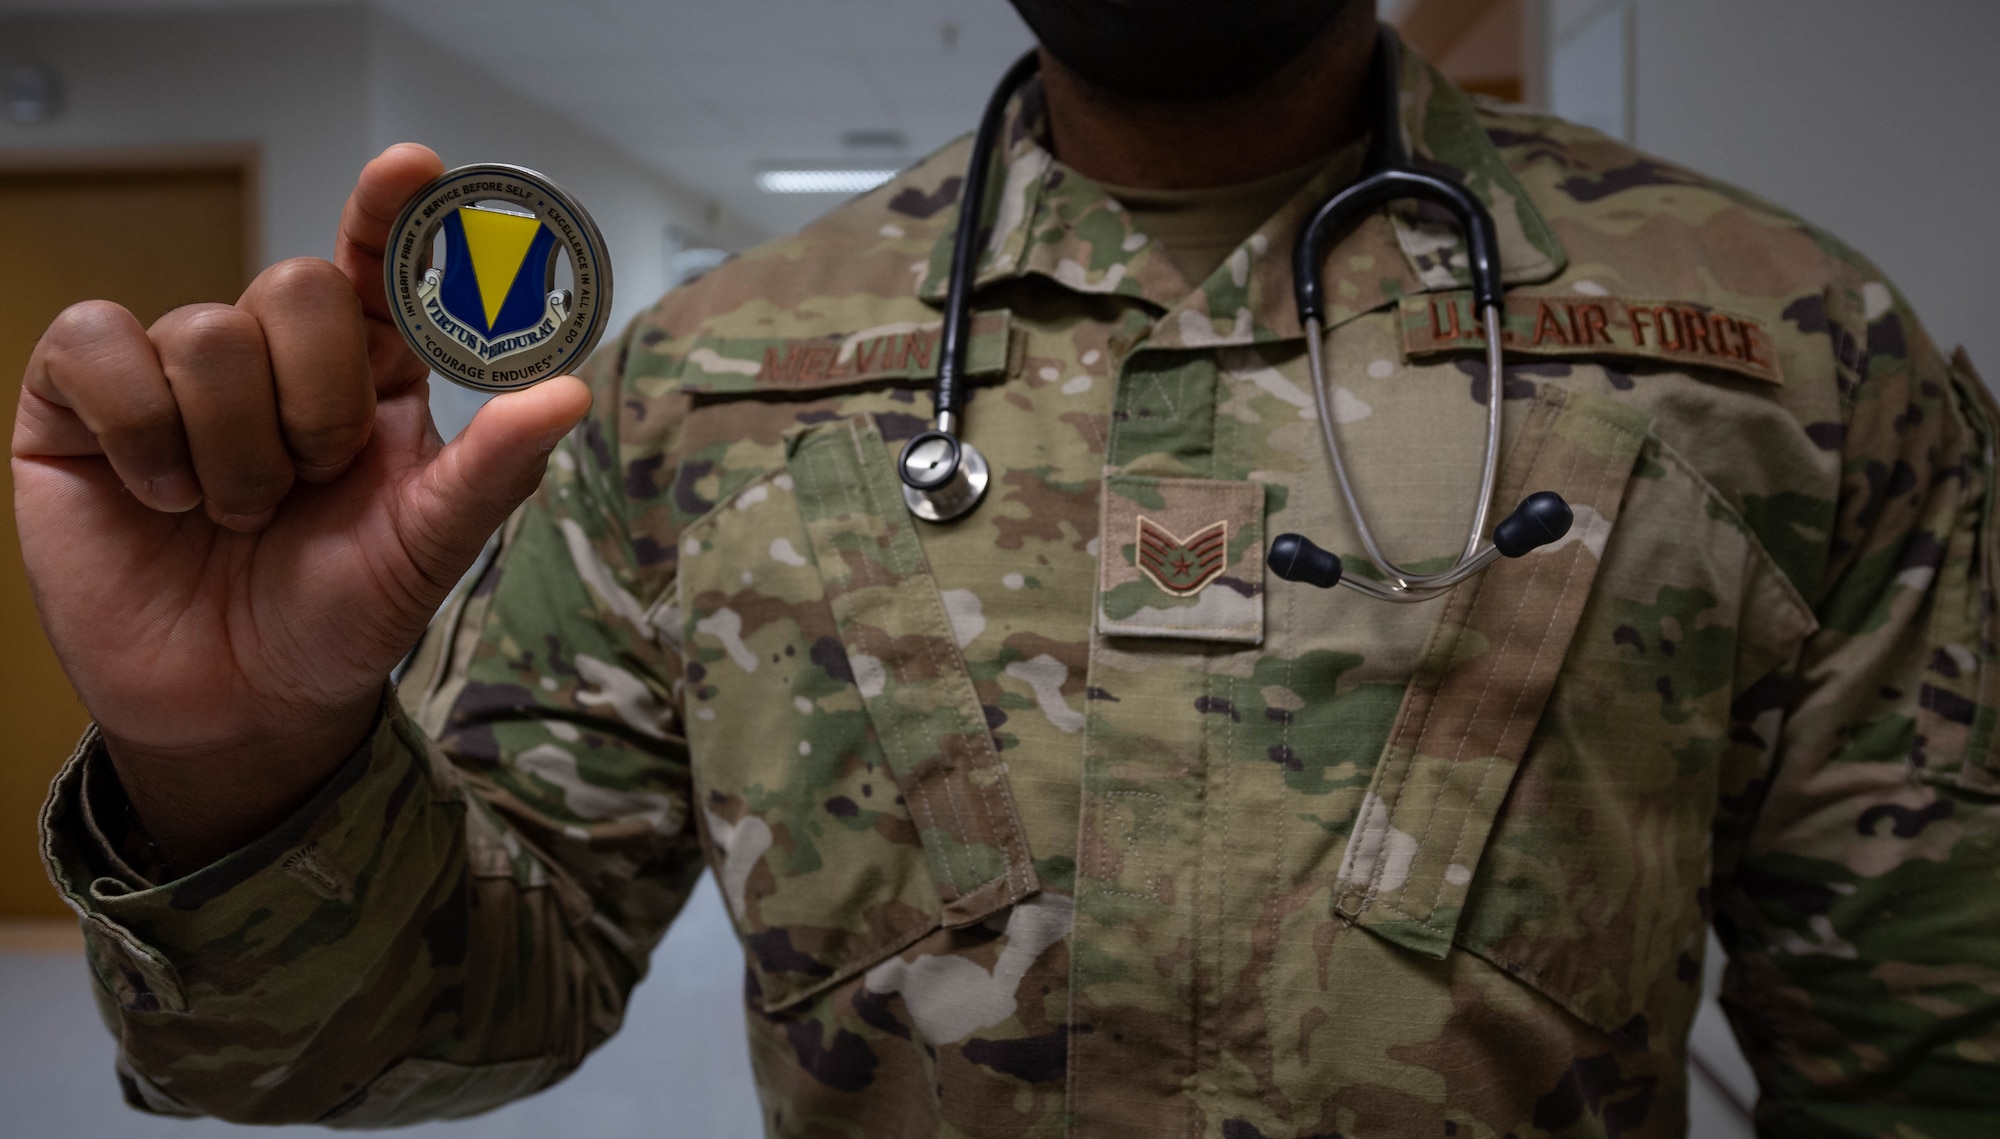 U.S. Air Force Staff Sgt. Lamaar Melvin, 86th Medical Squadron Labor and Delivery supervisor, holds the 86th Airlift Wing commander’s coin at the Landstuhl Regional Medical Center, Nov. 9, 2021. Melvin was presented with the commander’s coin for his outstanding work during the Afghanistan evacuation operations at Ramstein Air Base, Germany, Aug. 21, 2021, when he aided in the delivery of a child on the ramp of a C-17 Globemaster lll aircraft. (U.S. Air Force photo by Airman Jared Lovett)